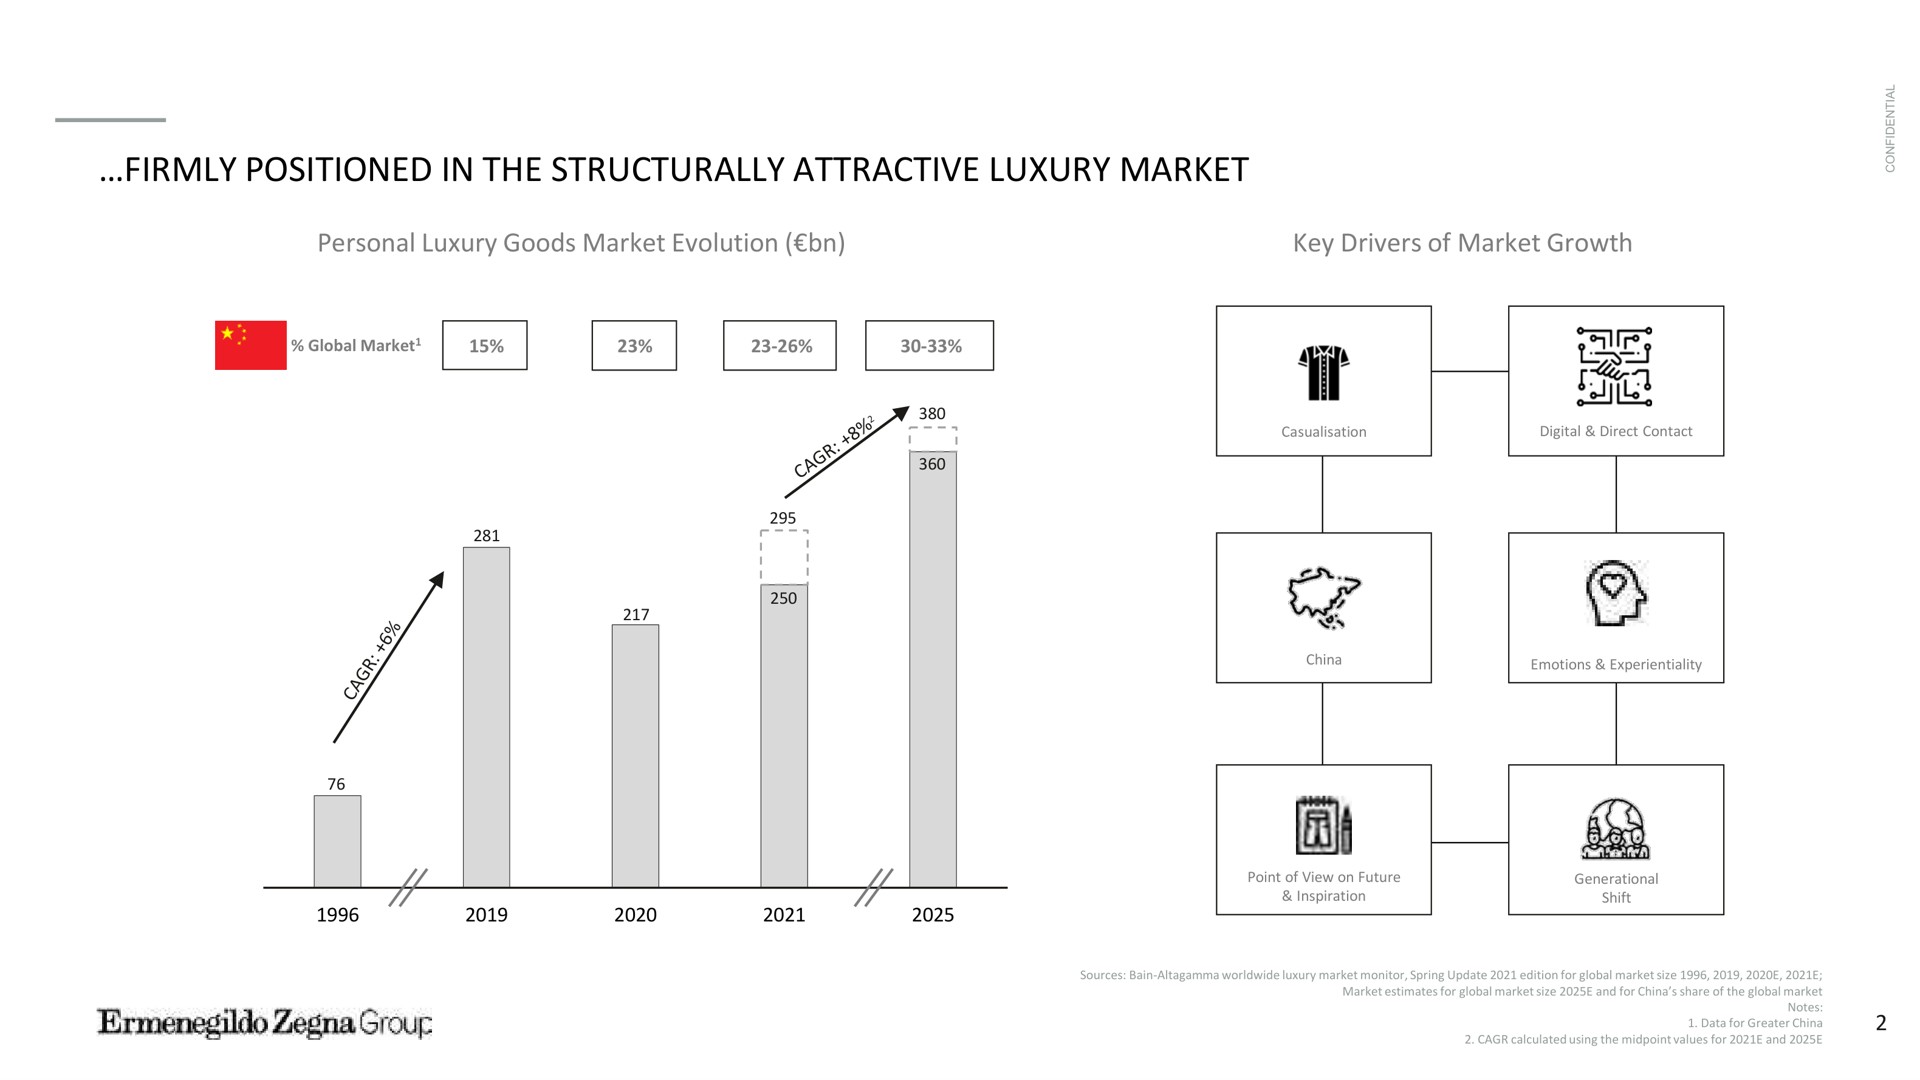 firmly positioned in the structurally attractive luxury market personal luxury goods market evolution key drivers of market growth it a ory | Zegna